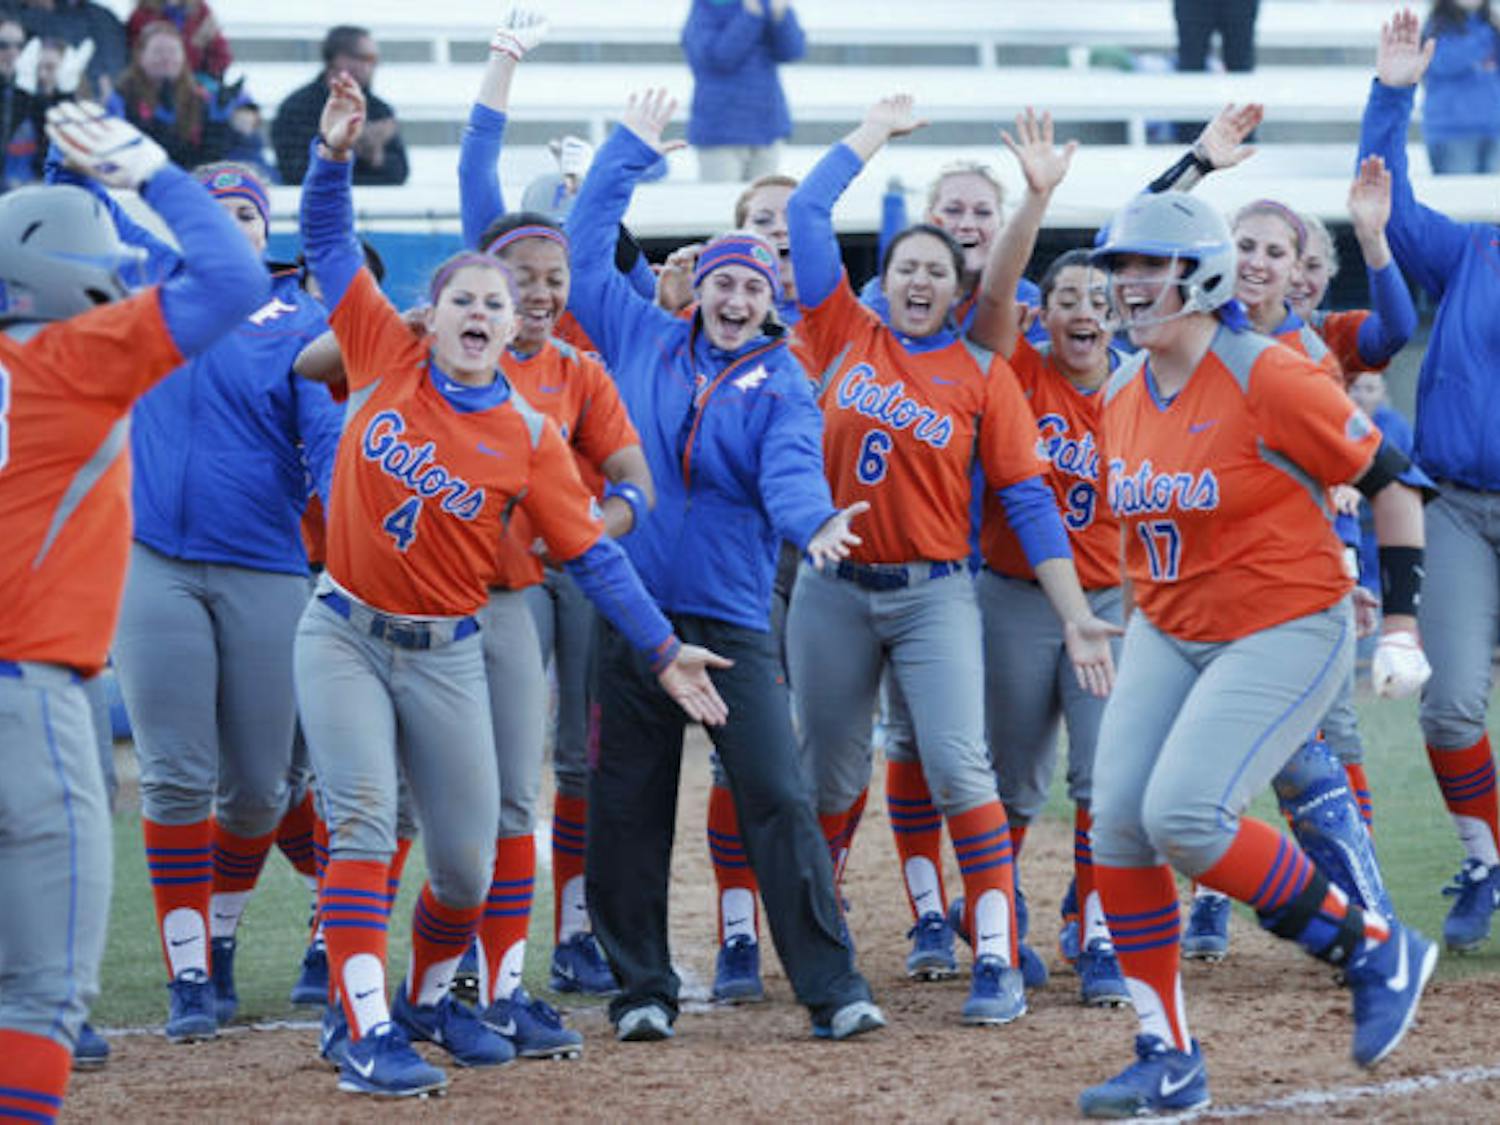 Lauren Haeger (17) runs home after hitting a game-tying homer during Florida’s 4-3 victory against Charleston Southern on Feb. 17 at Katie Seashole Pressly Stadium.
